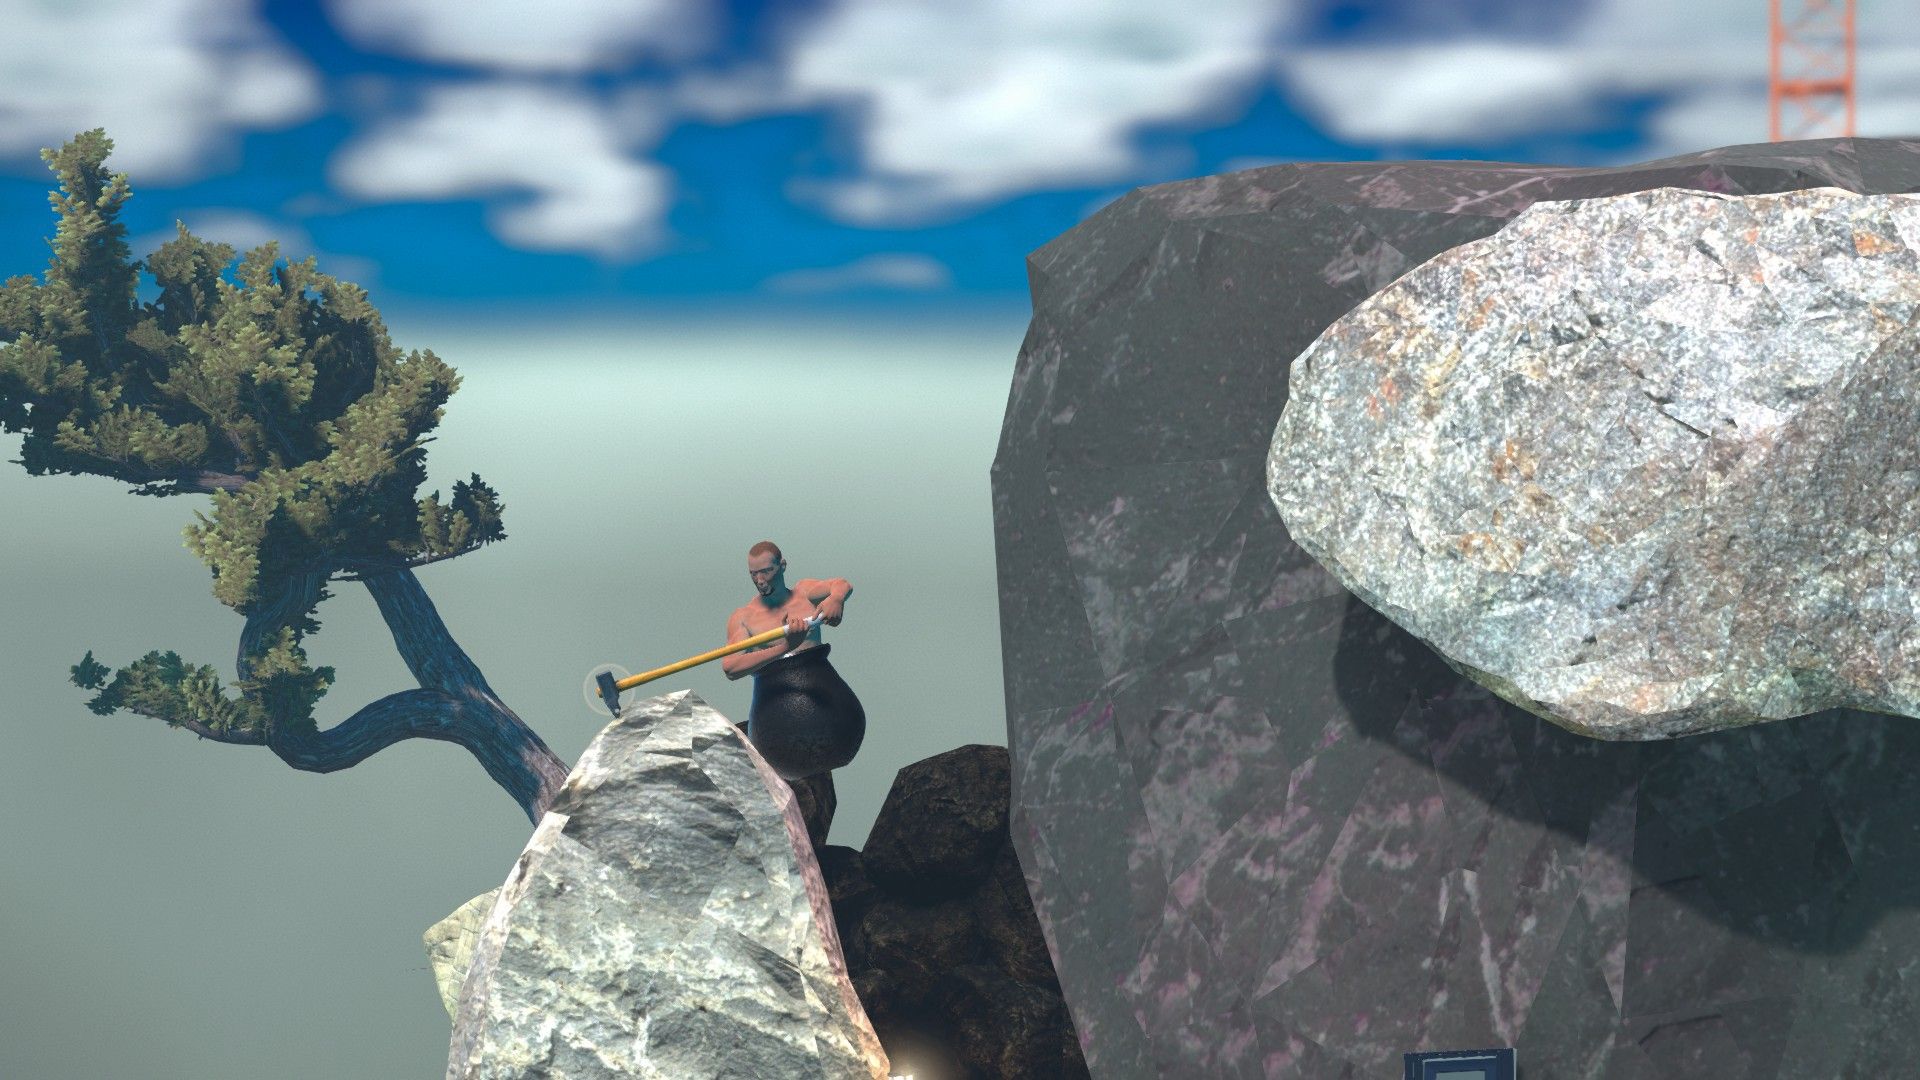 Getting Over It With Bennett Foddy: I Laugh, I Cry, I Continue.